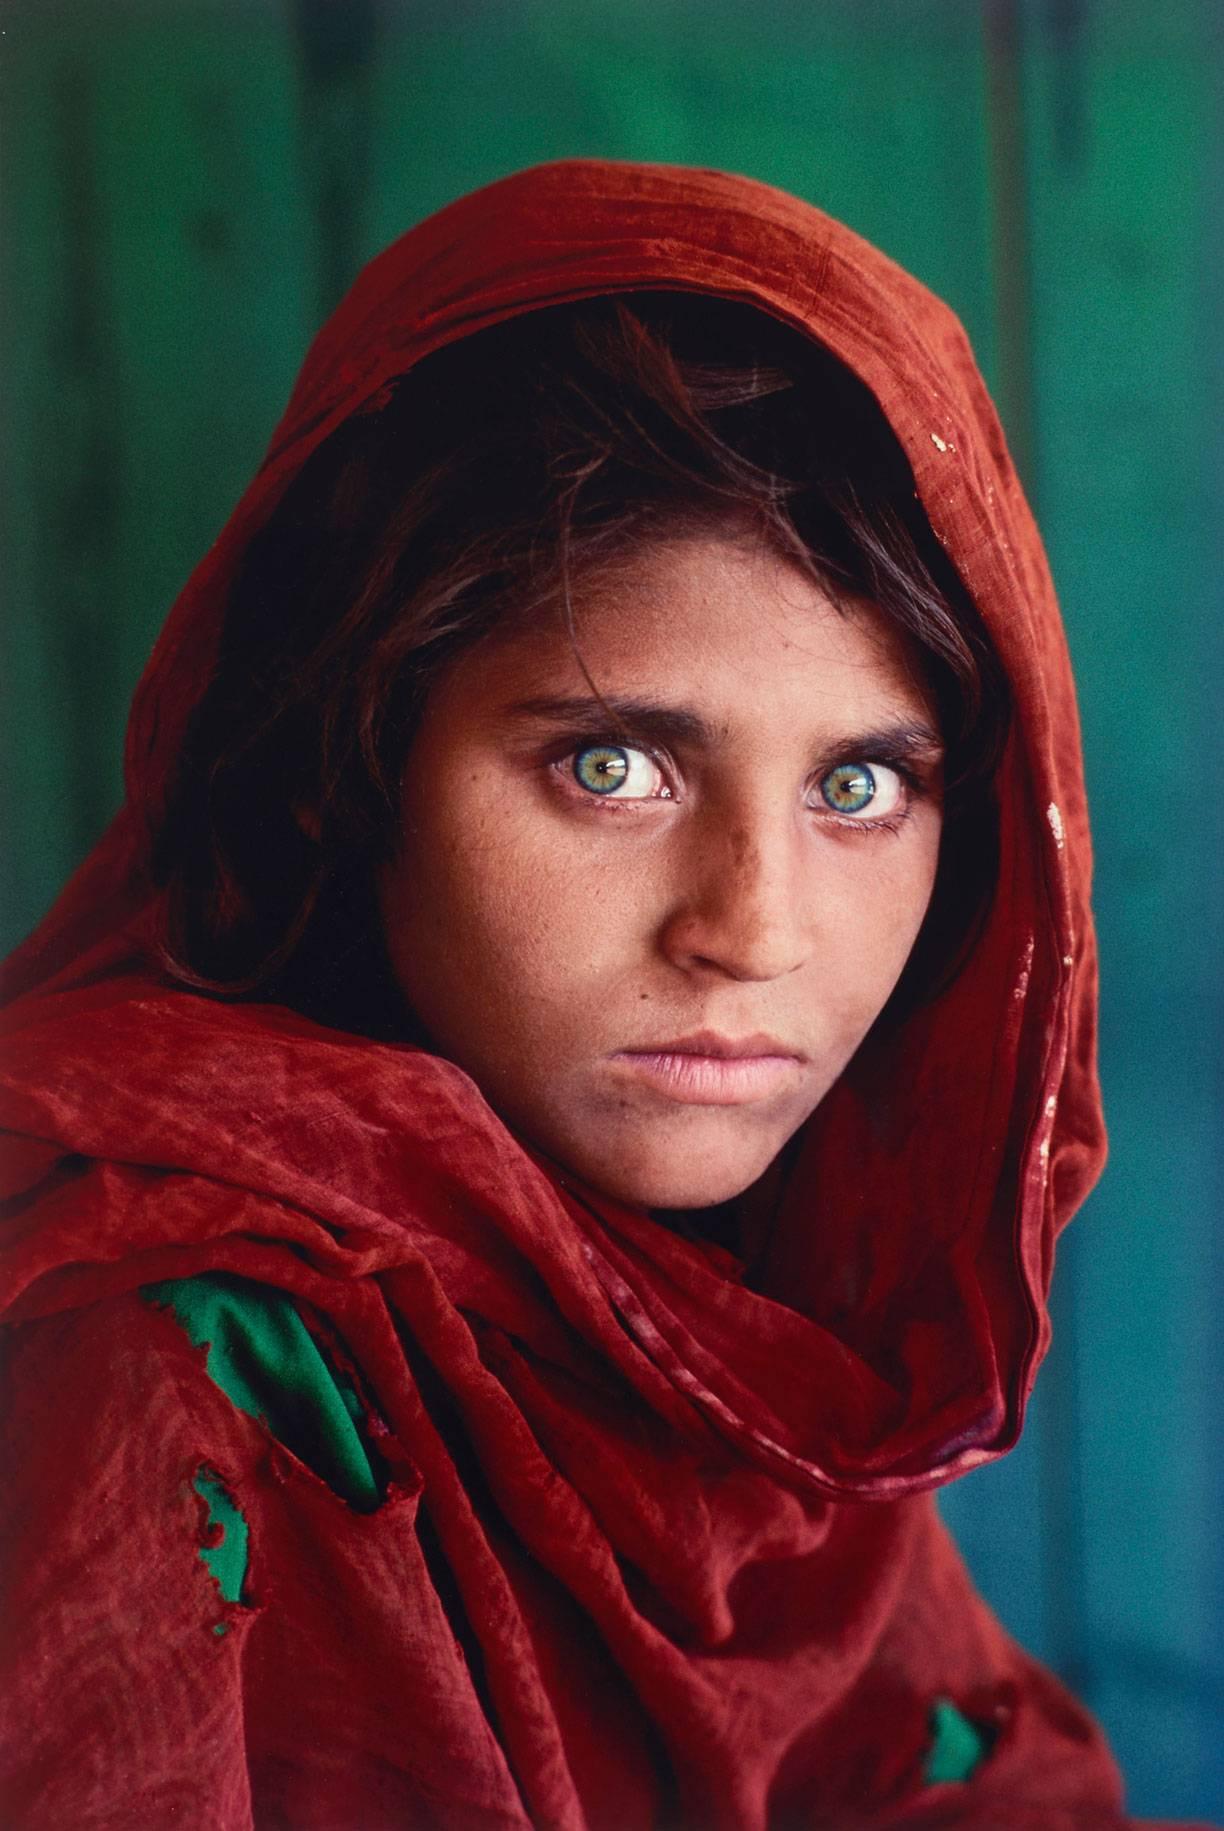 Steve McCurry
Afghan Girl
1984 (printed later
C-print on Fuji Crystal archival paper
24 x 20 inches
Signed and dated

Steve McCurry has been one of the most iconic voices in contemporary photography for more than 30 years, with scores of magazine